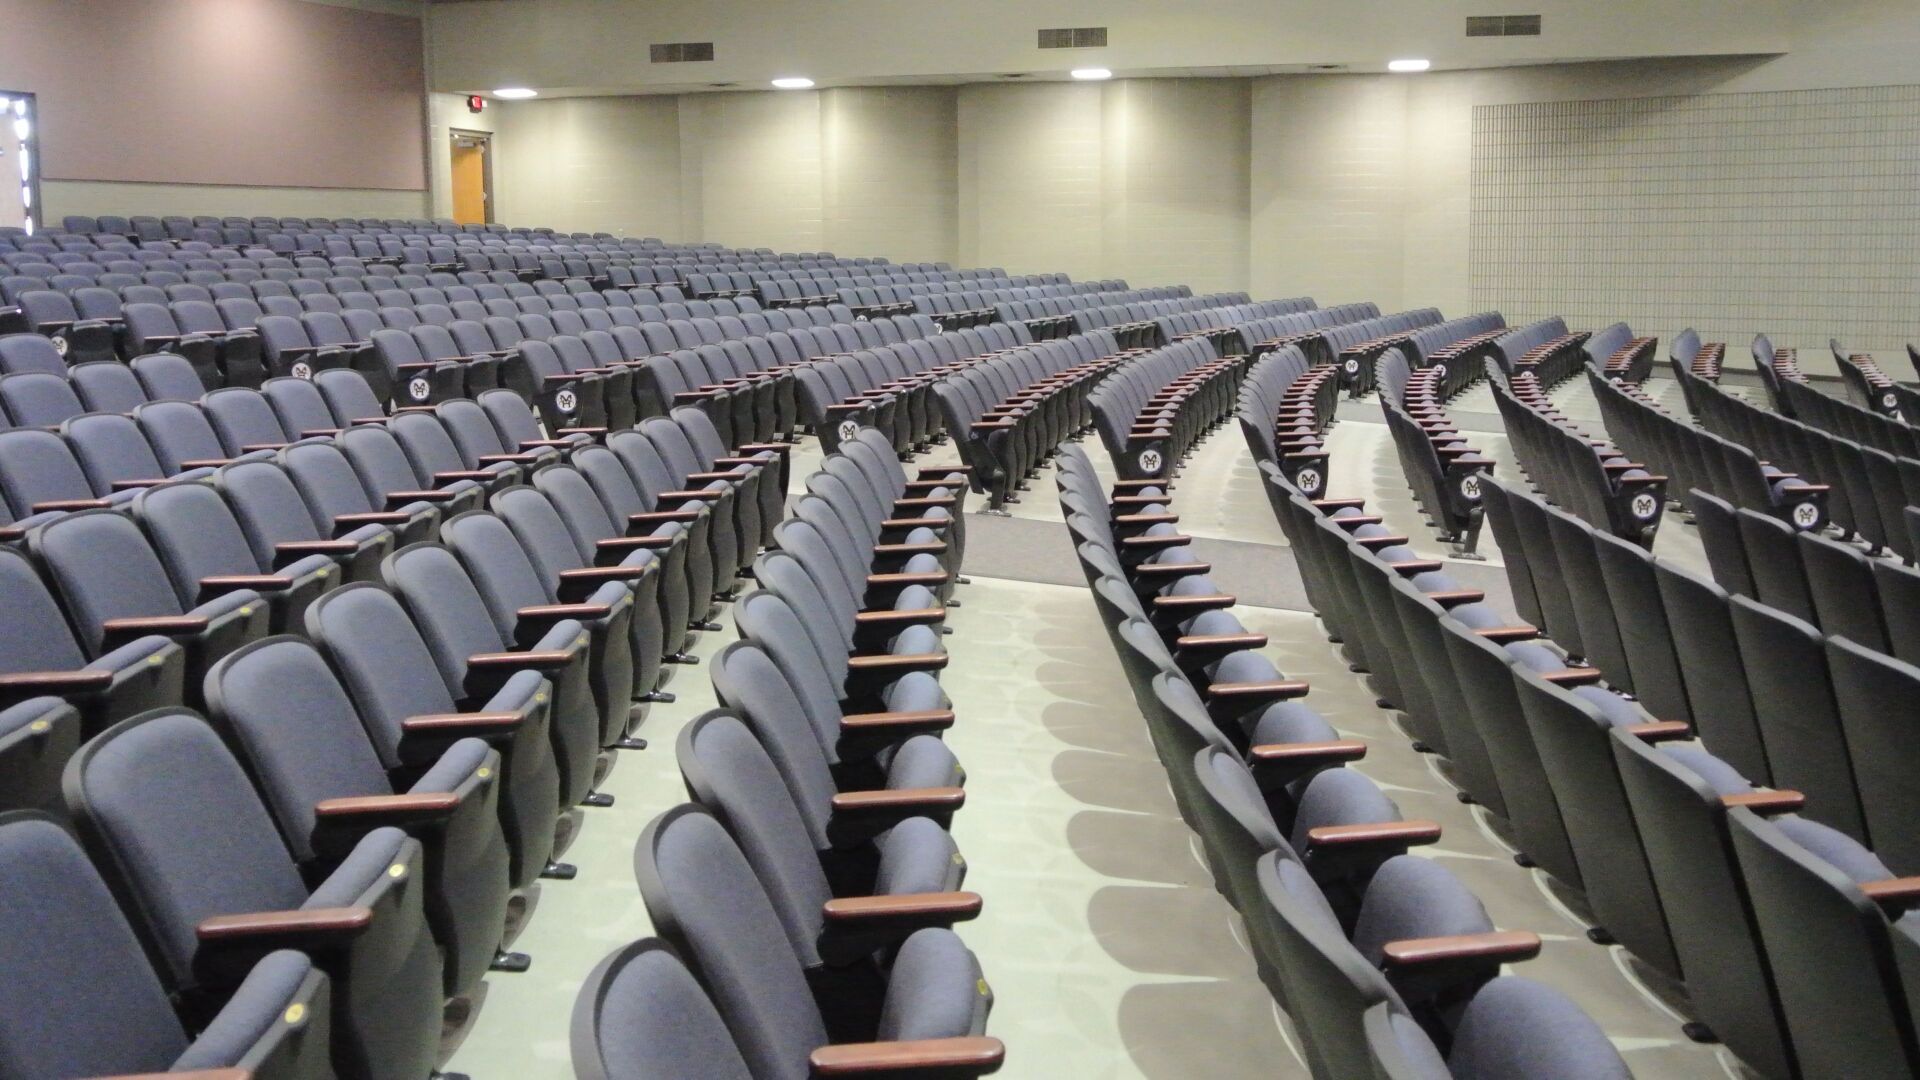 image of theater seats